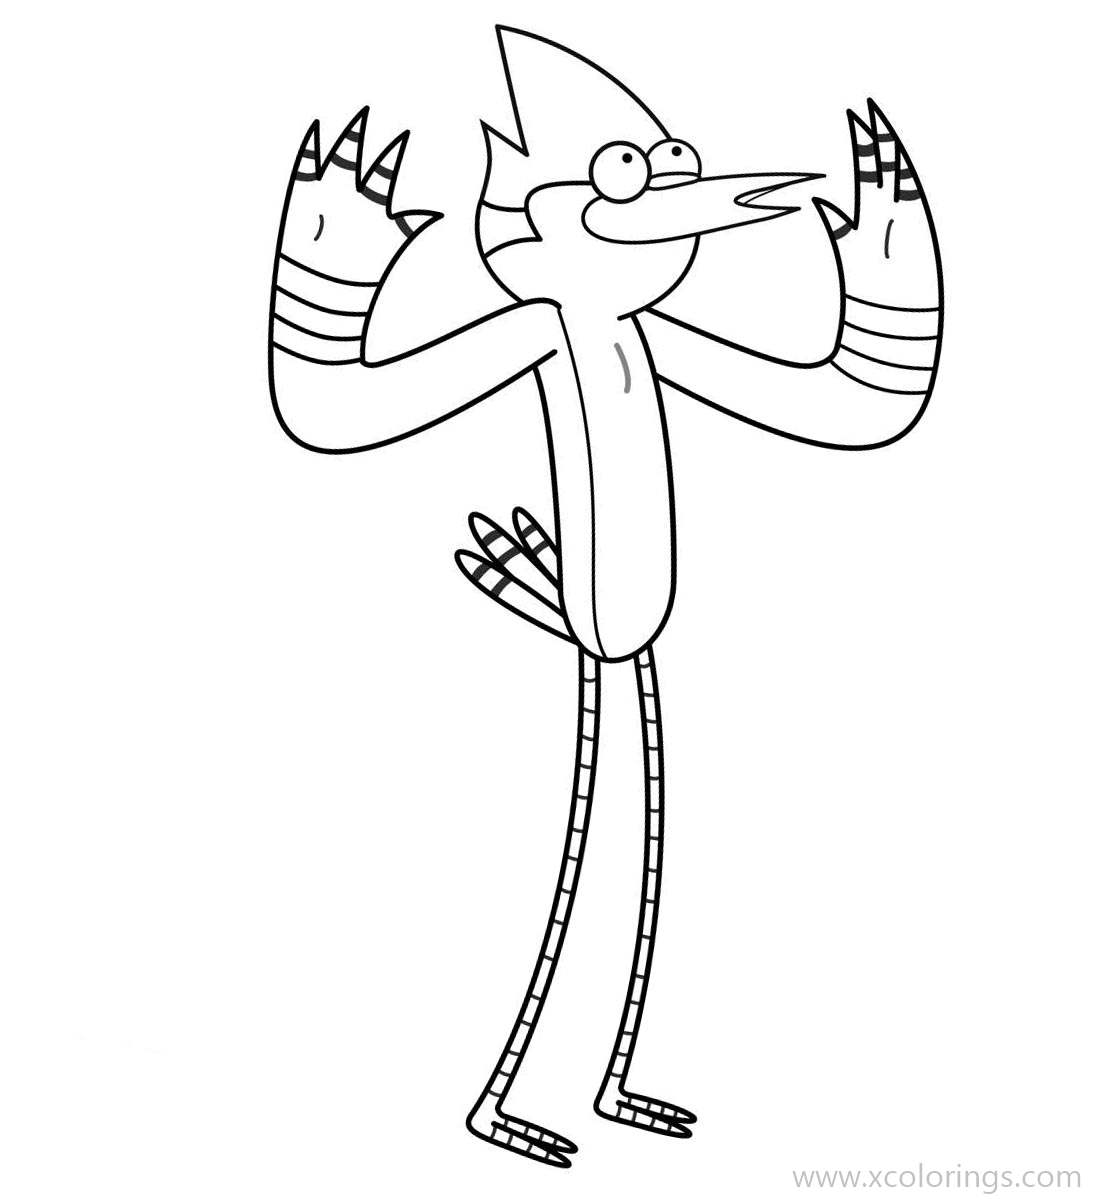 Free Mordecai From Regular Show Coloring Page printable